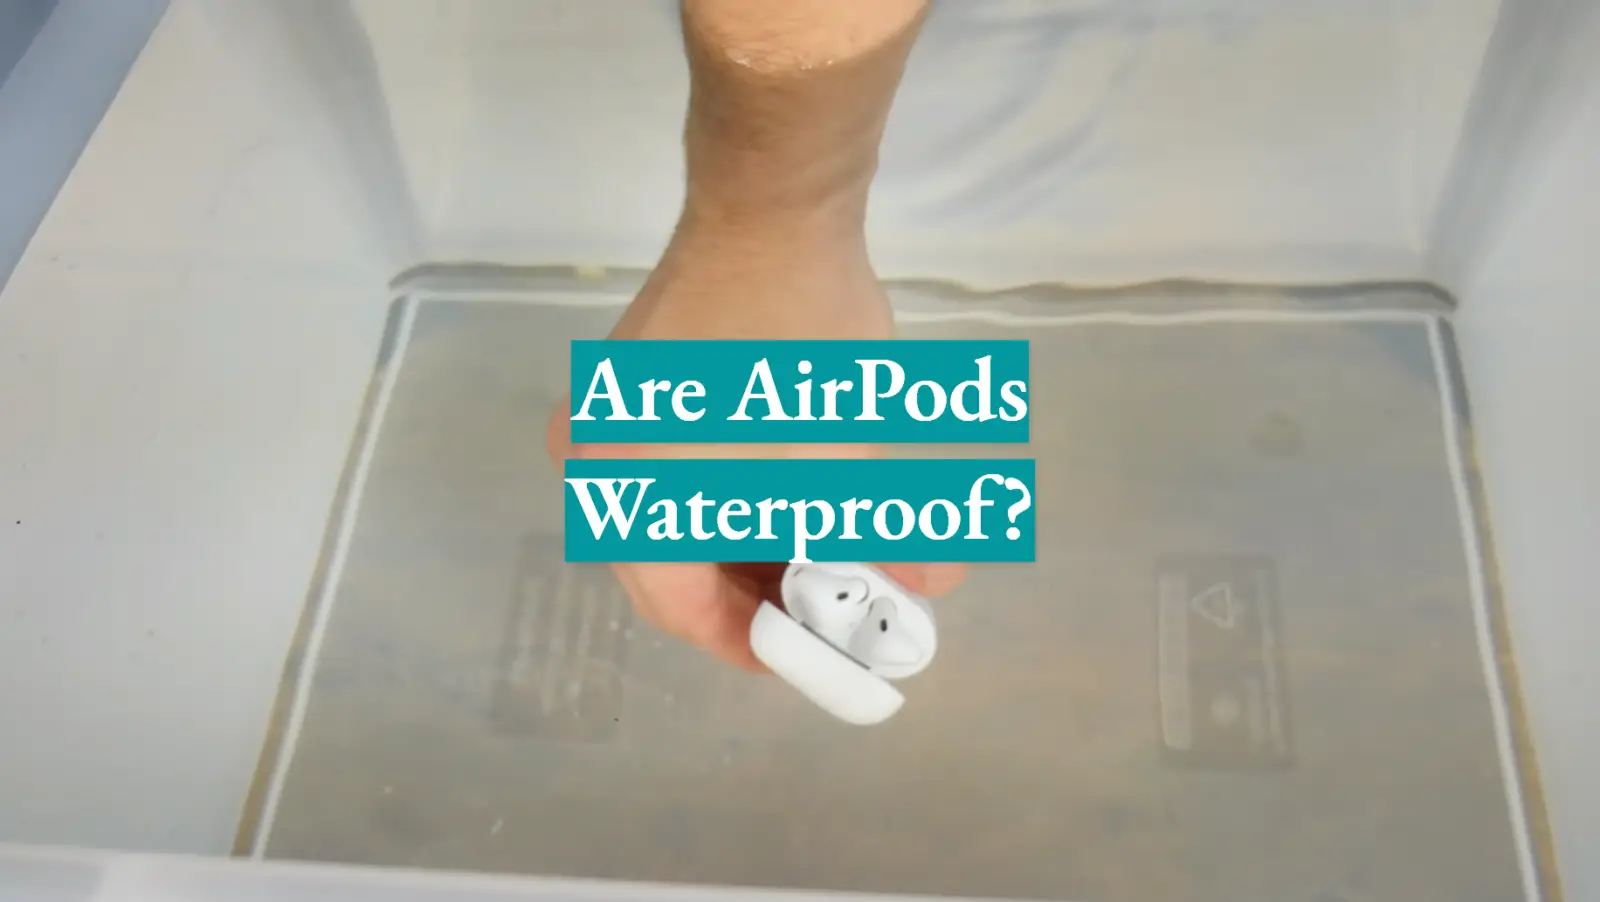 Are AirPods Waterproof?